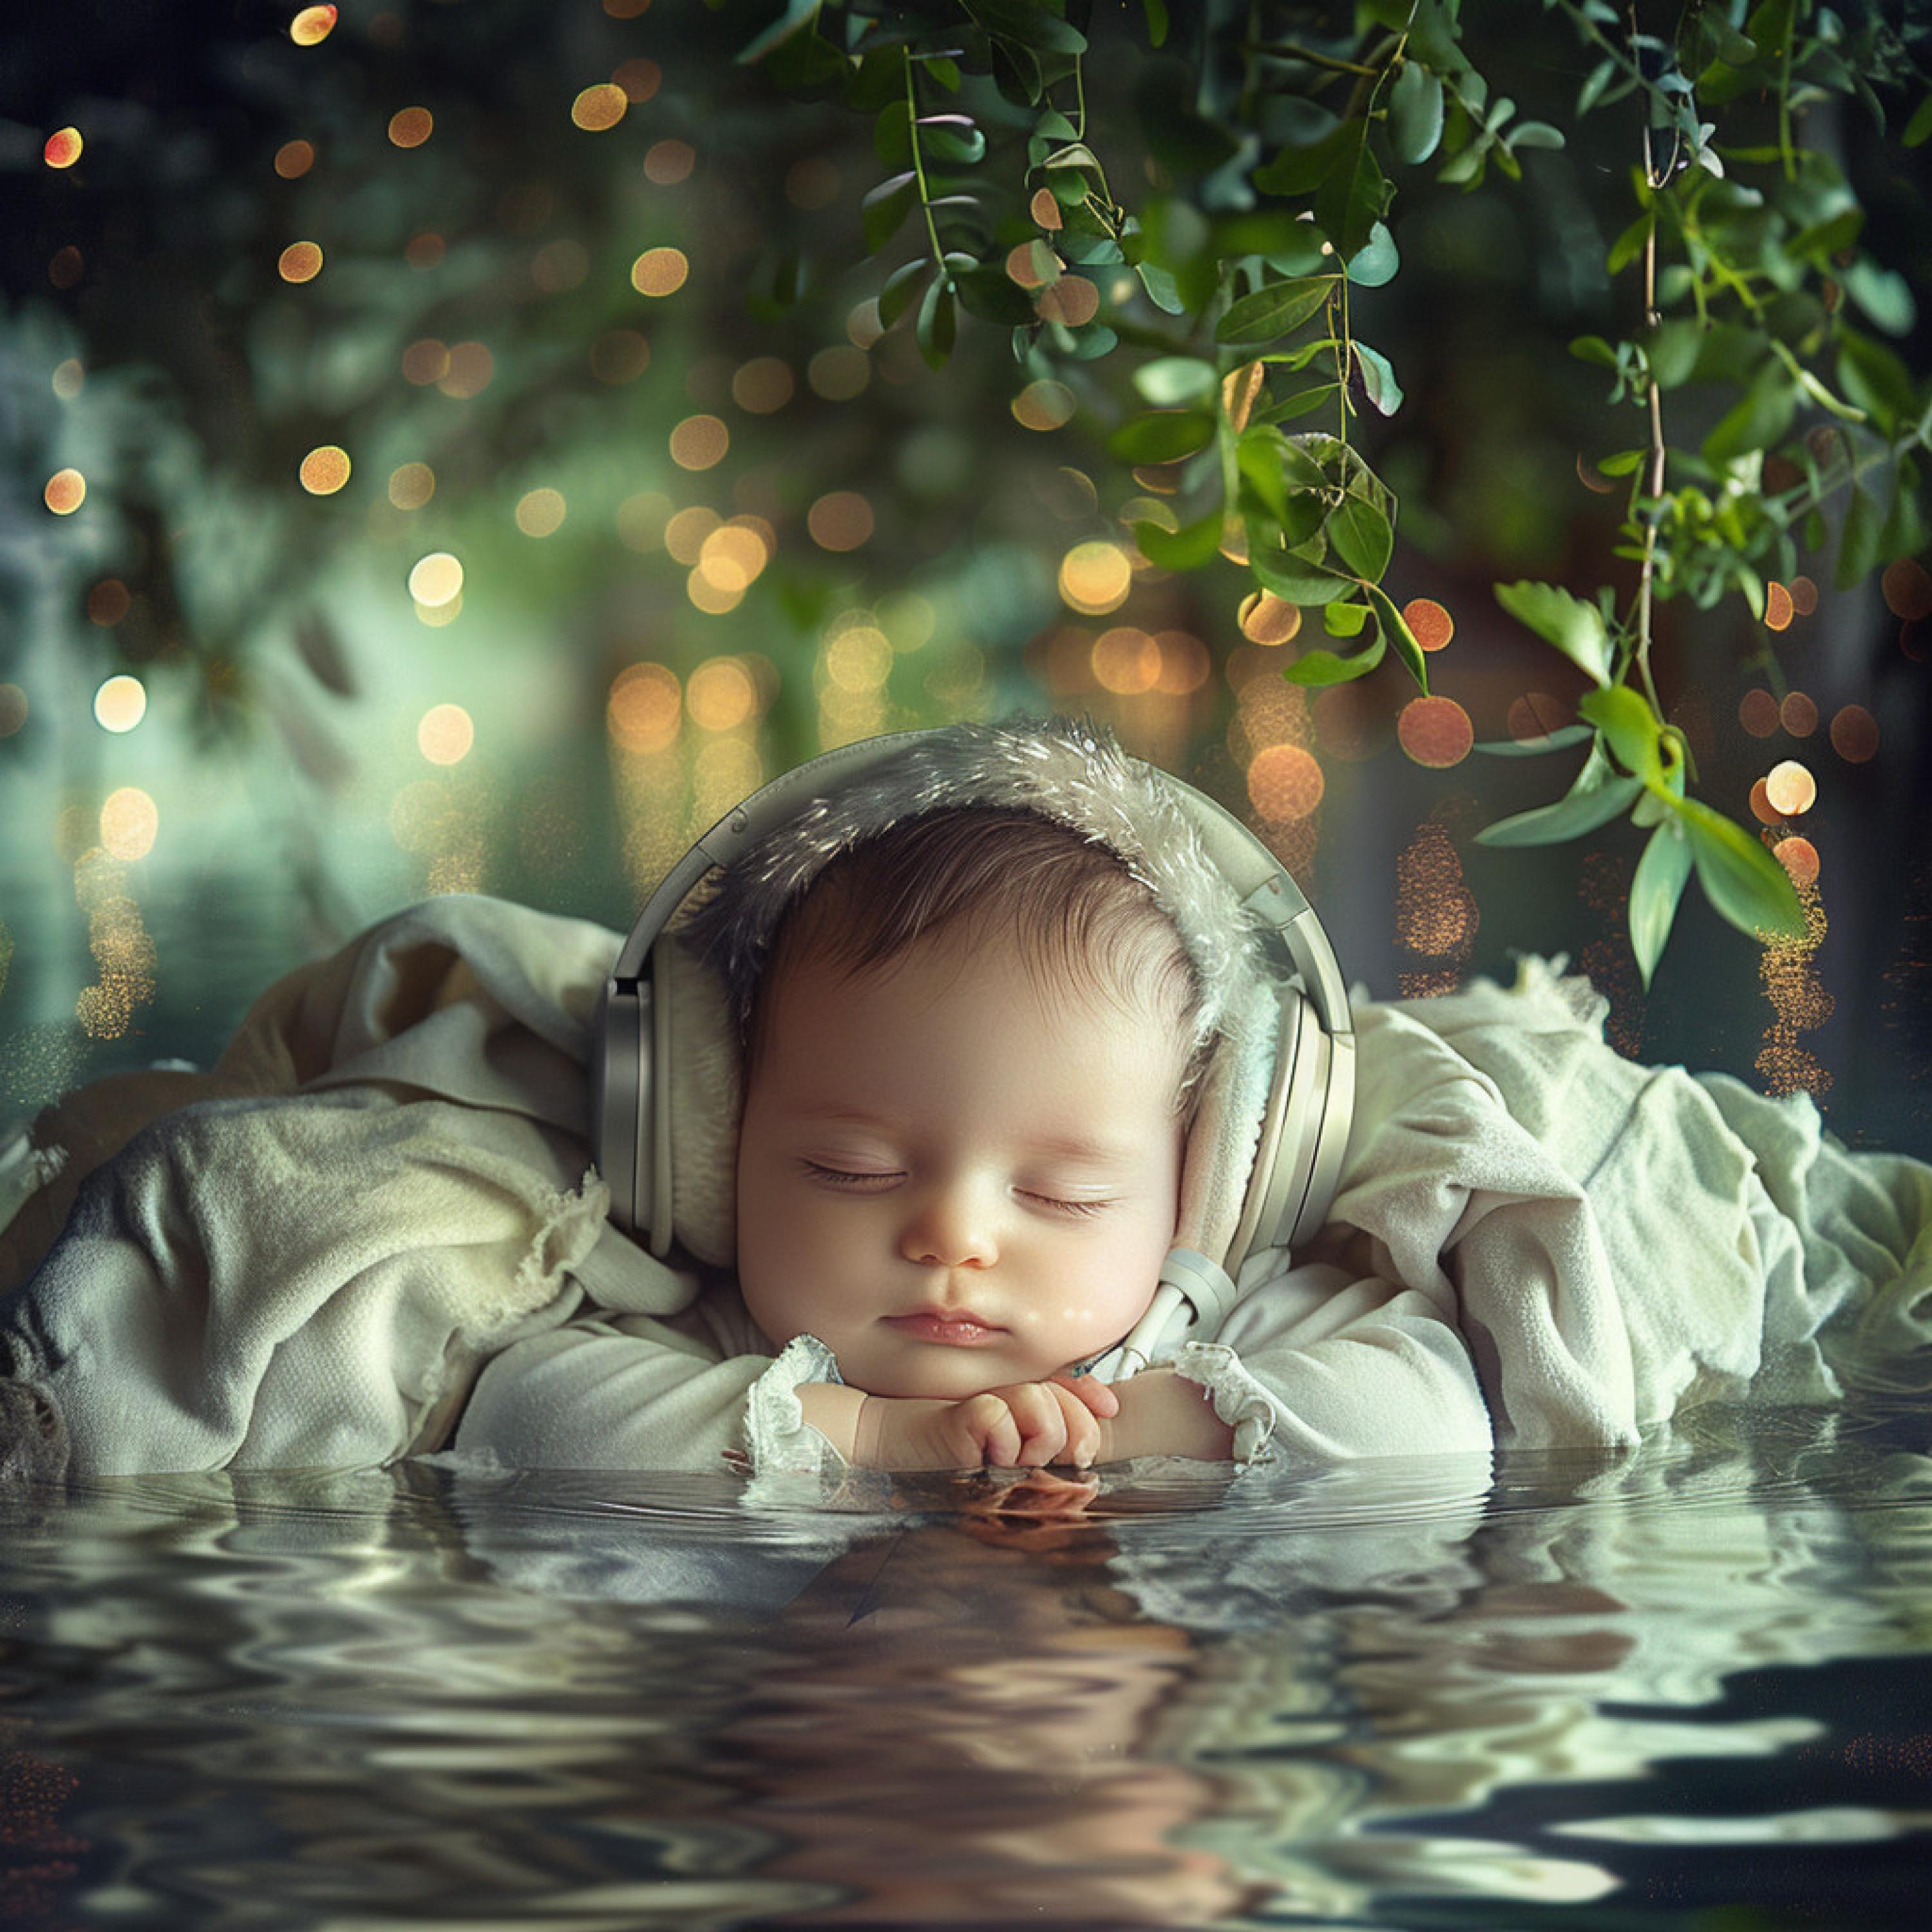 Baby Music Artists - Cradling Water Sounds